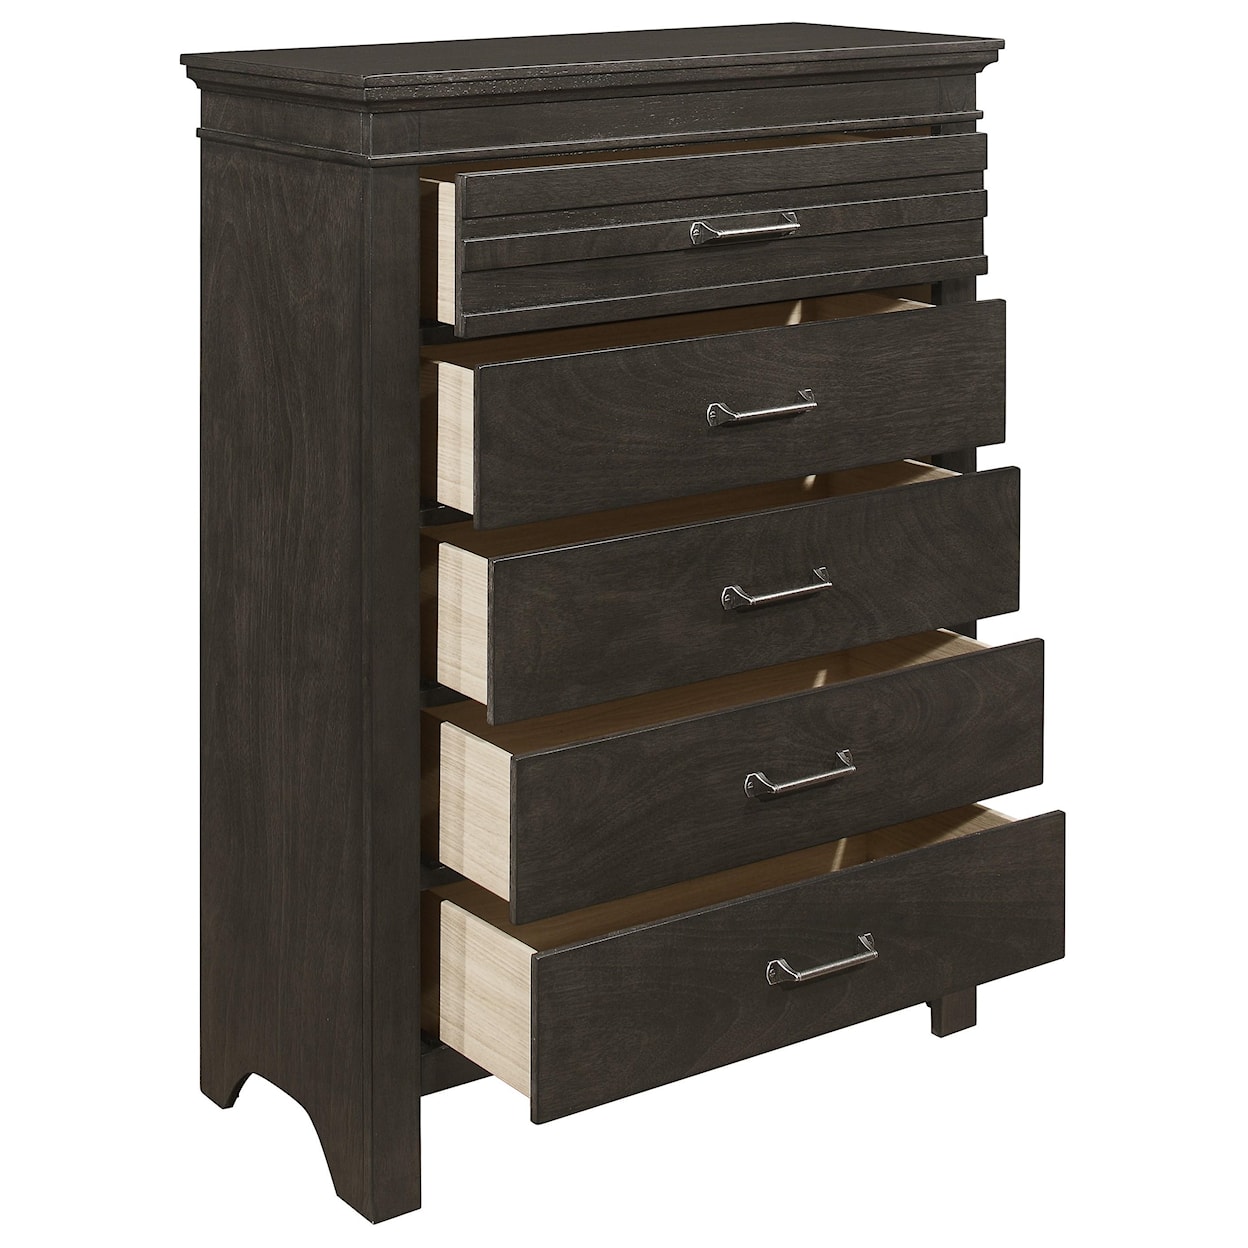 Homelegance Furniture Blaire Farm Drawer Chests